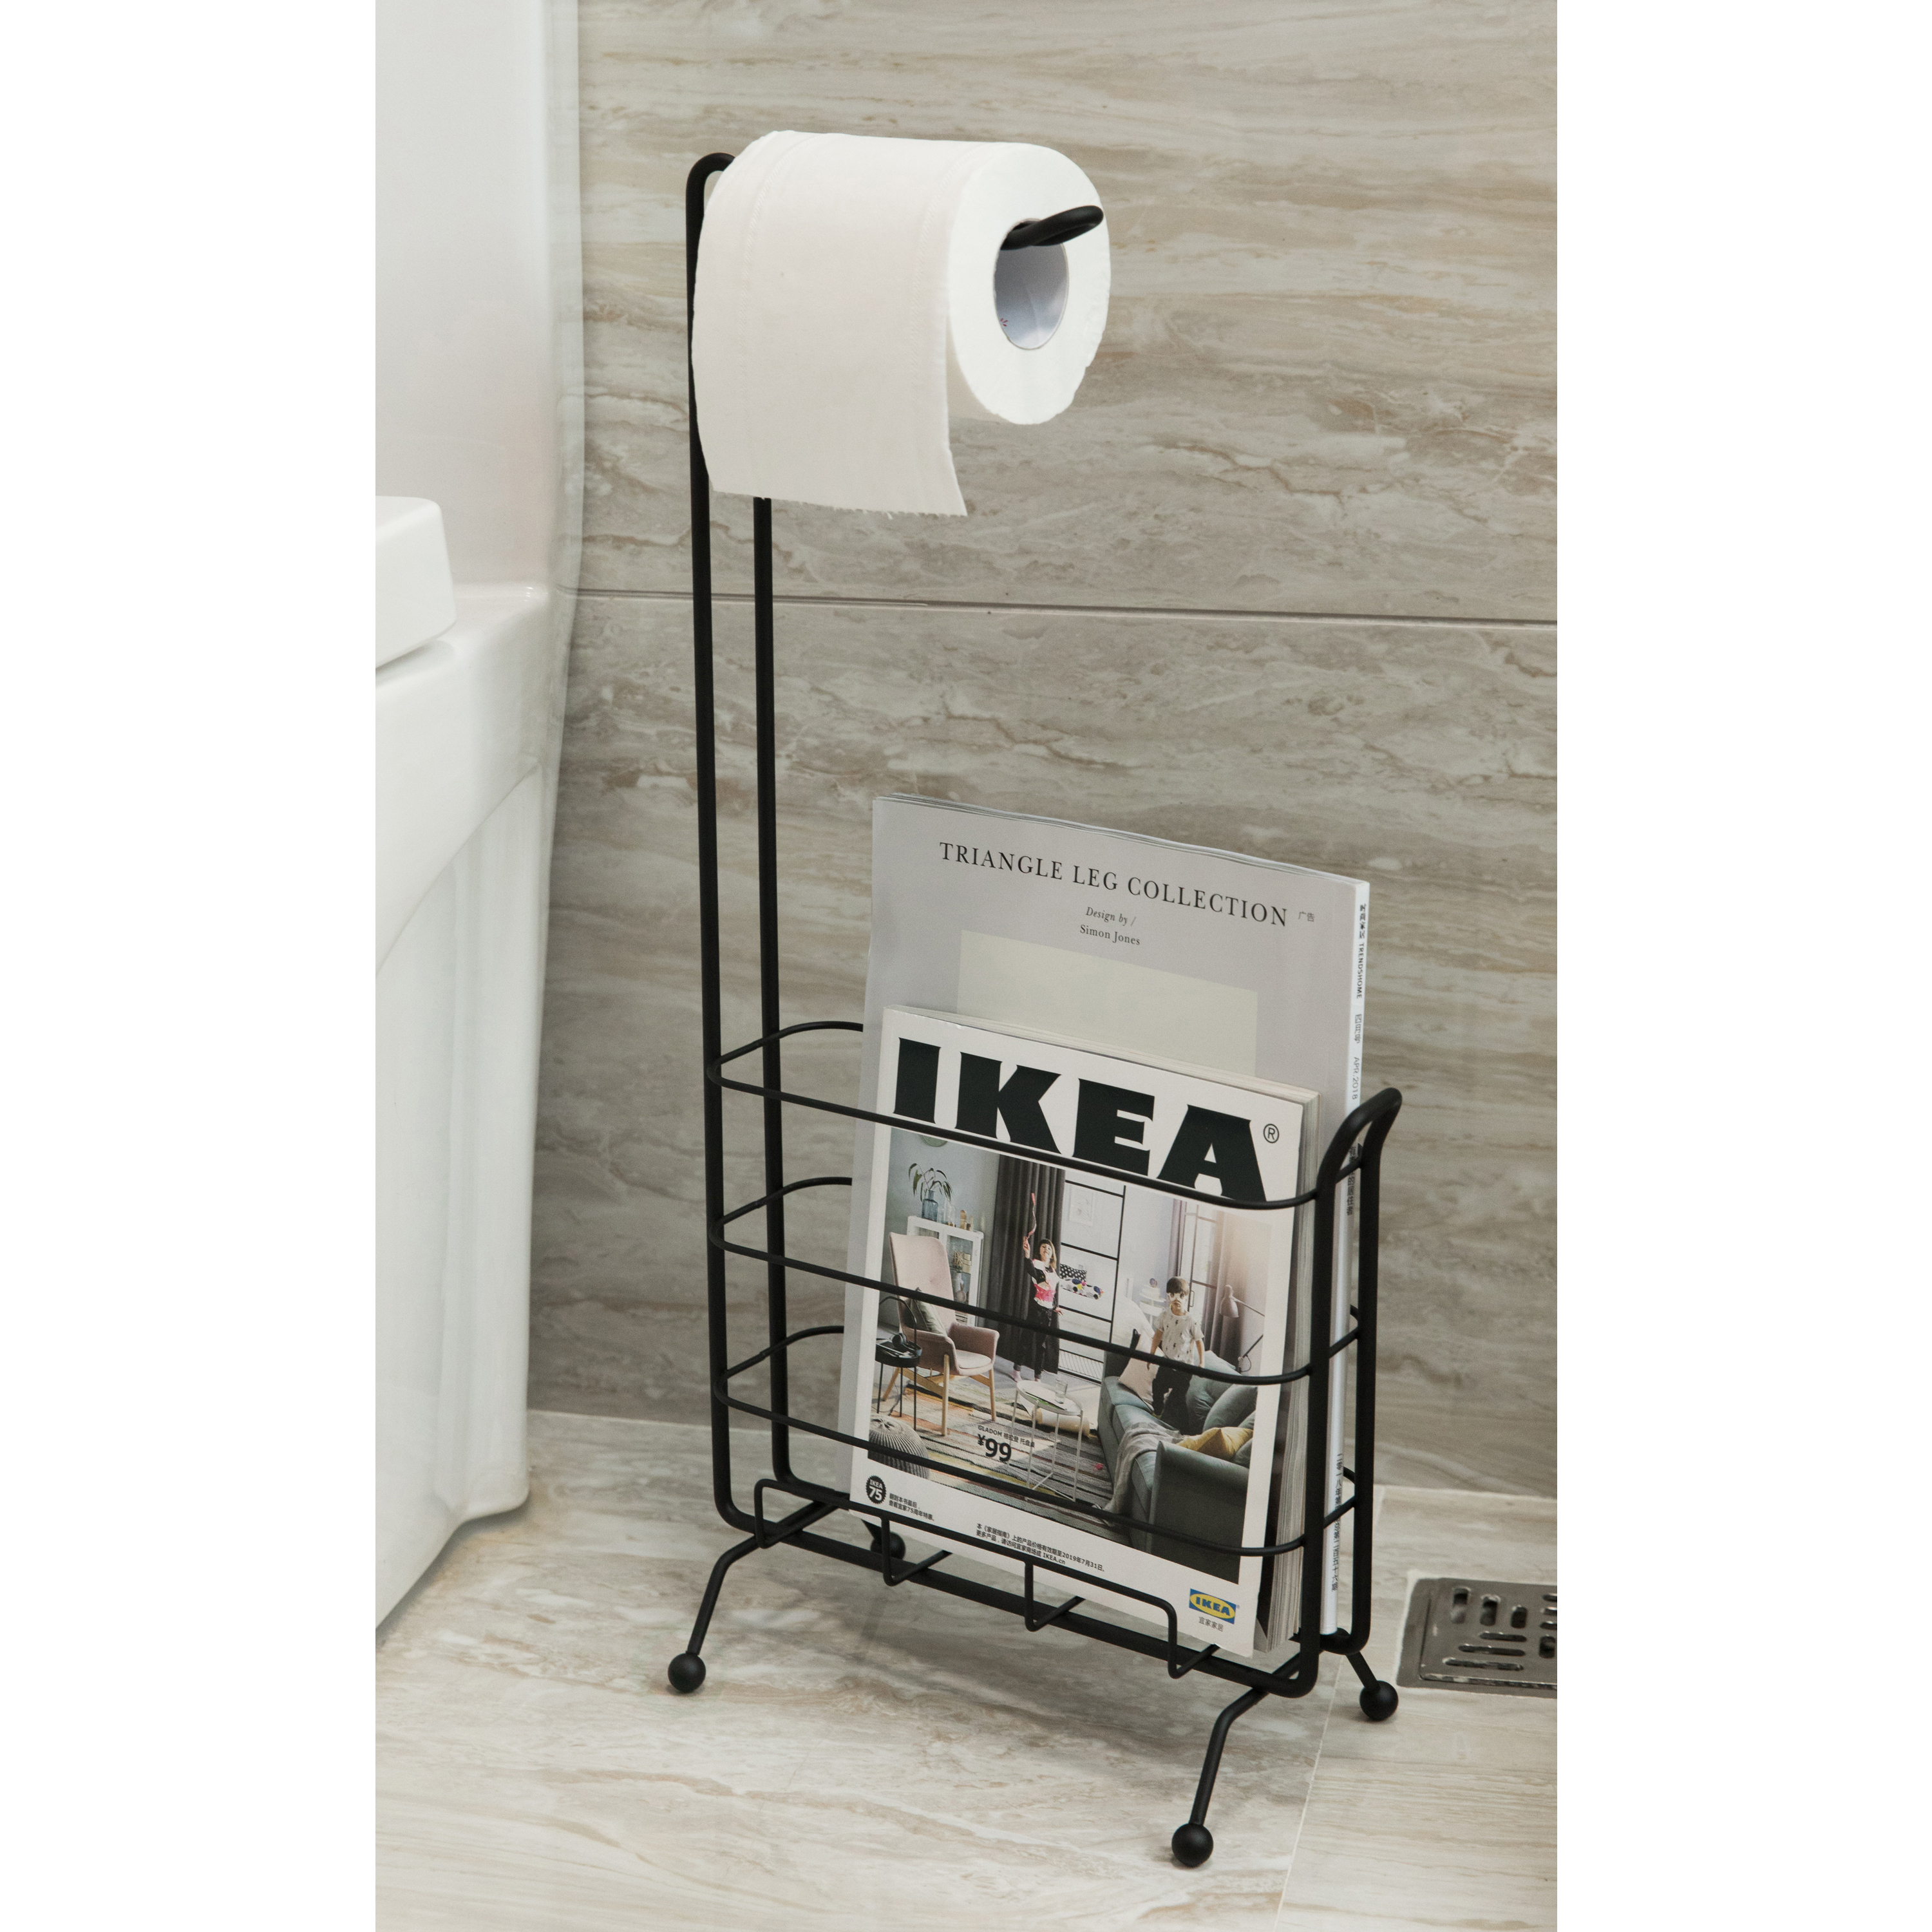 Metal Toilet Paper Holder With Magazine Rack